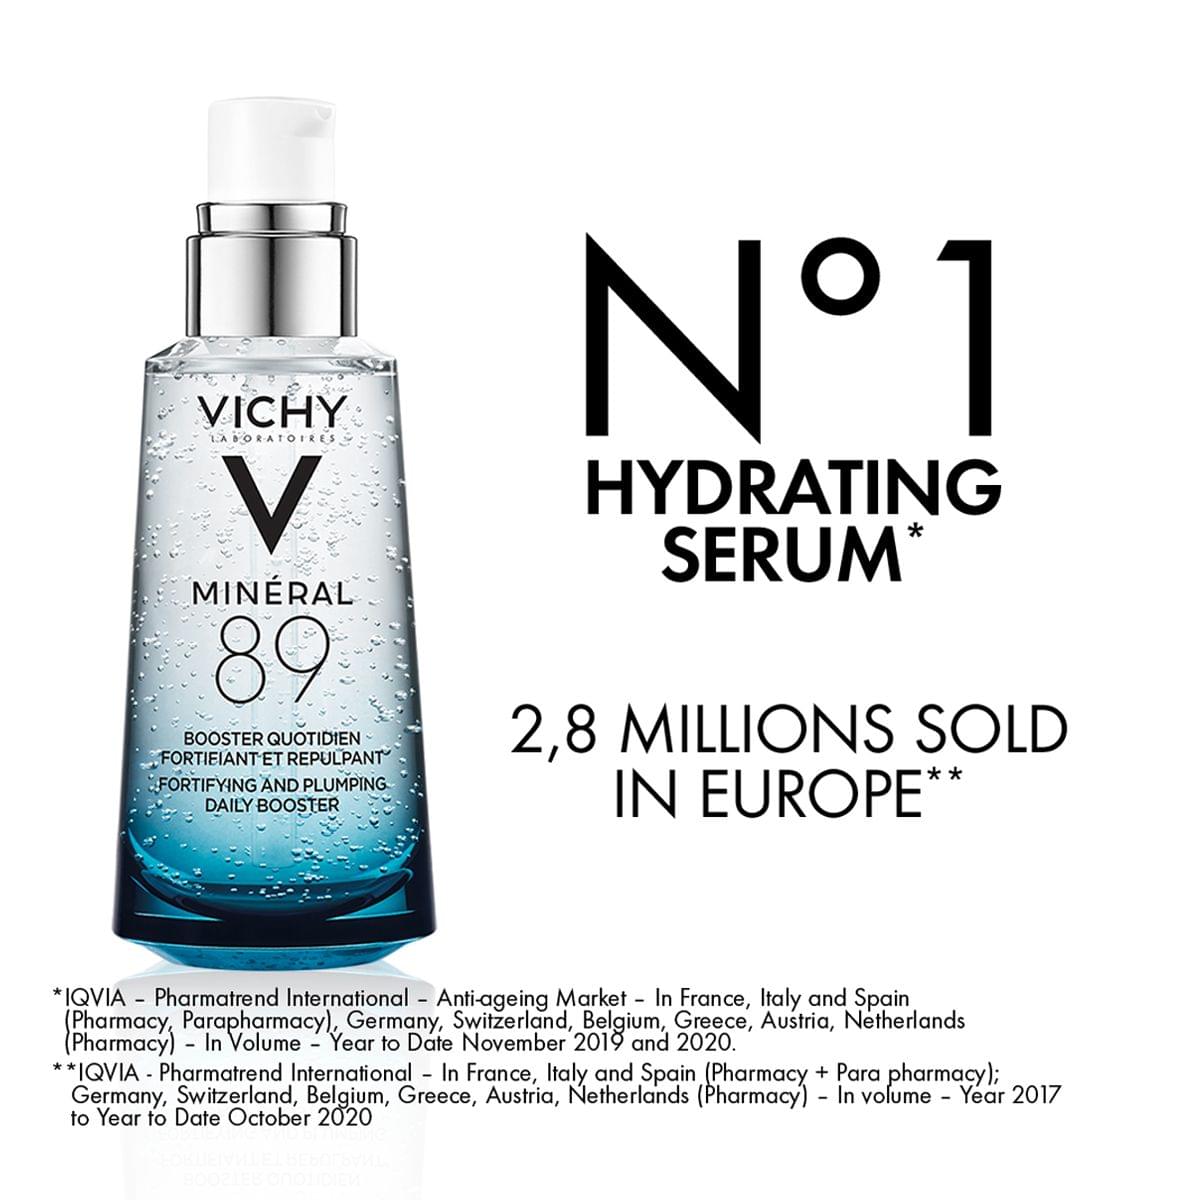 VICHY Mineral 89 Hyaluronic Acid Hydrating Serum for All Skin Types 50ml